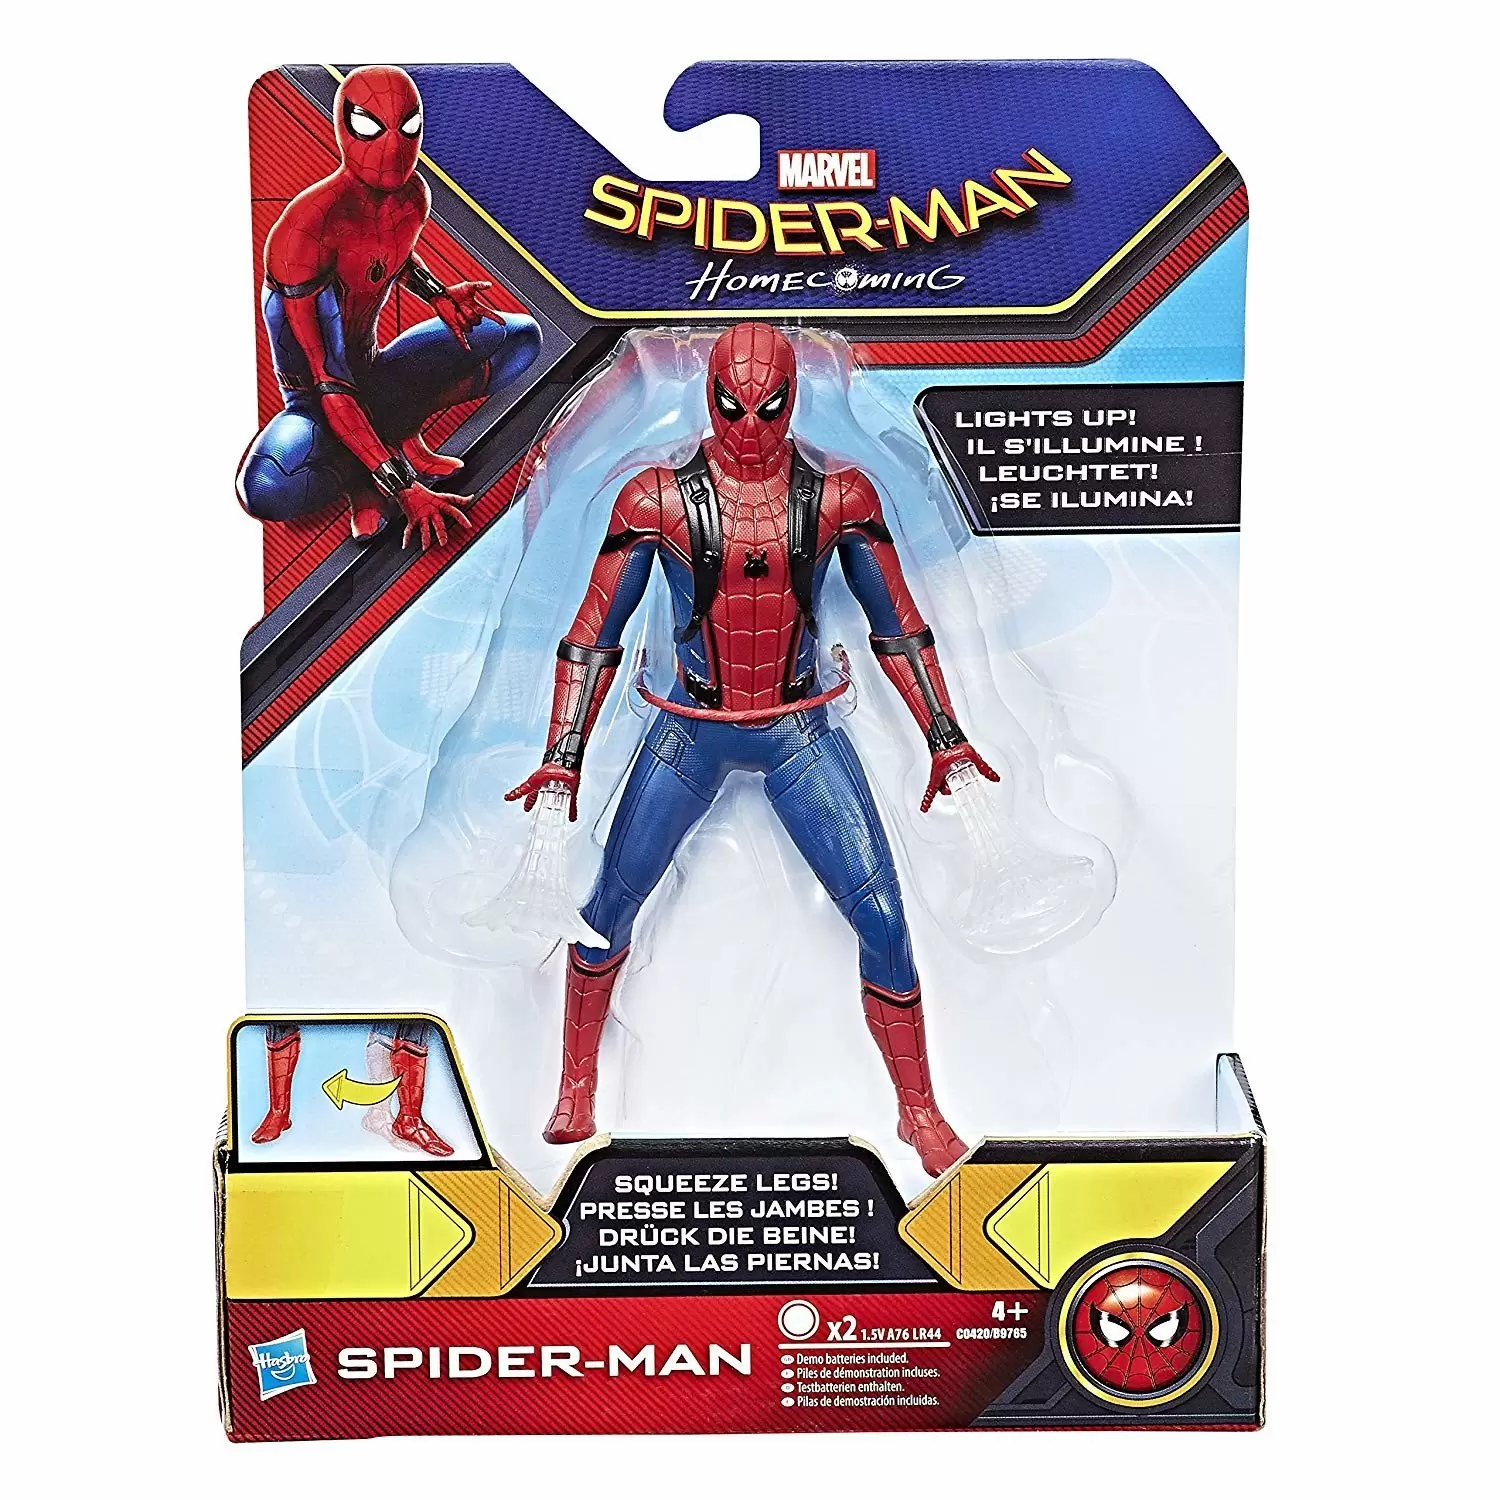 Spider-Man Homecoming Feature Action Figure Wave 1 Set - Spider-Man Homecoming - Spider-Man